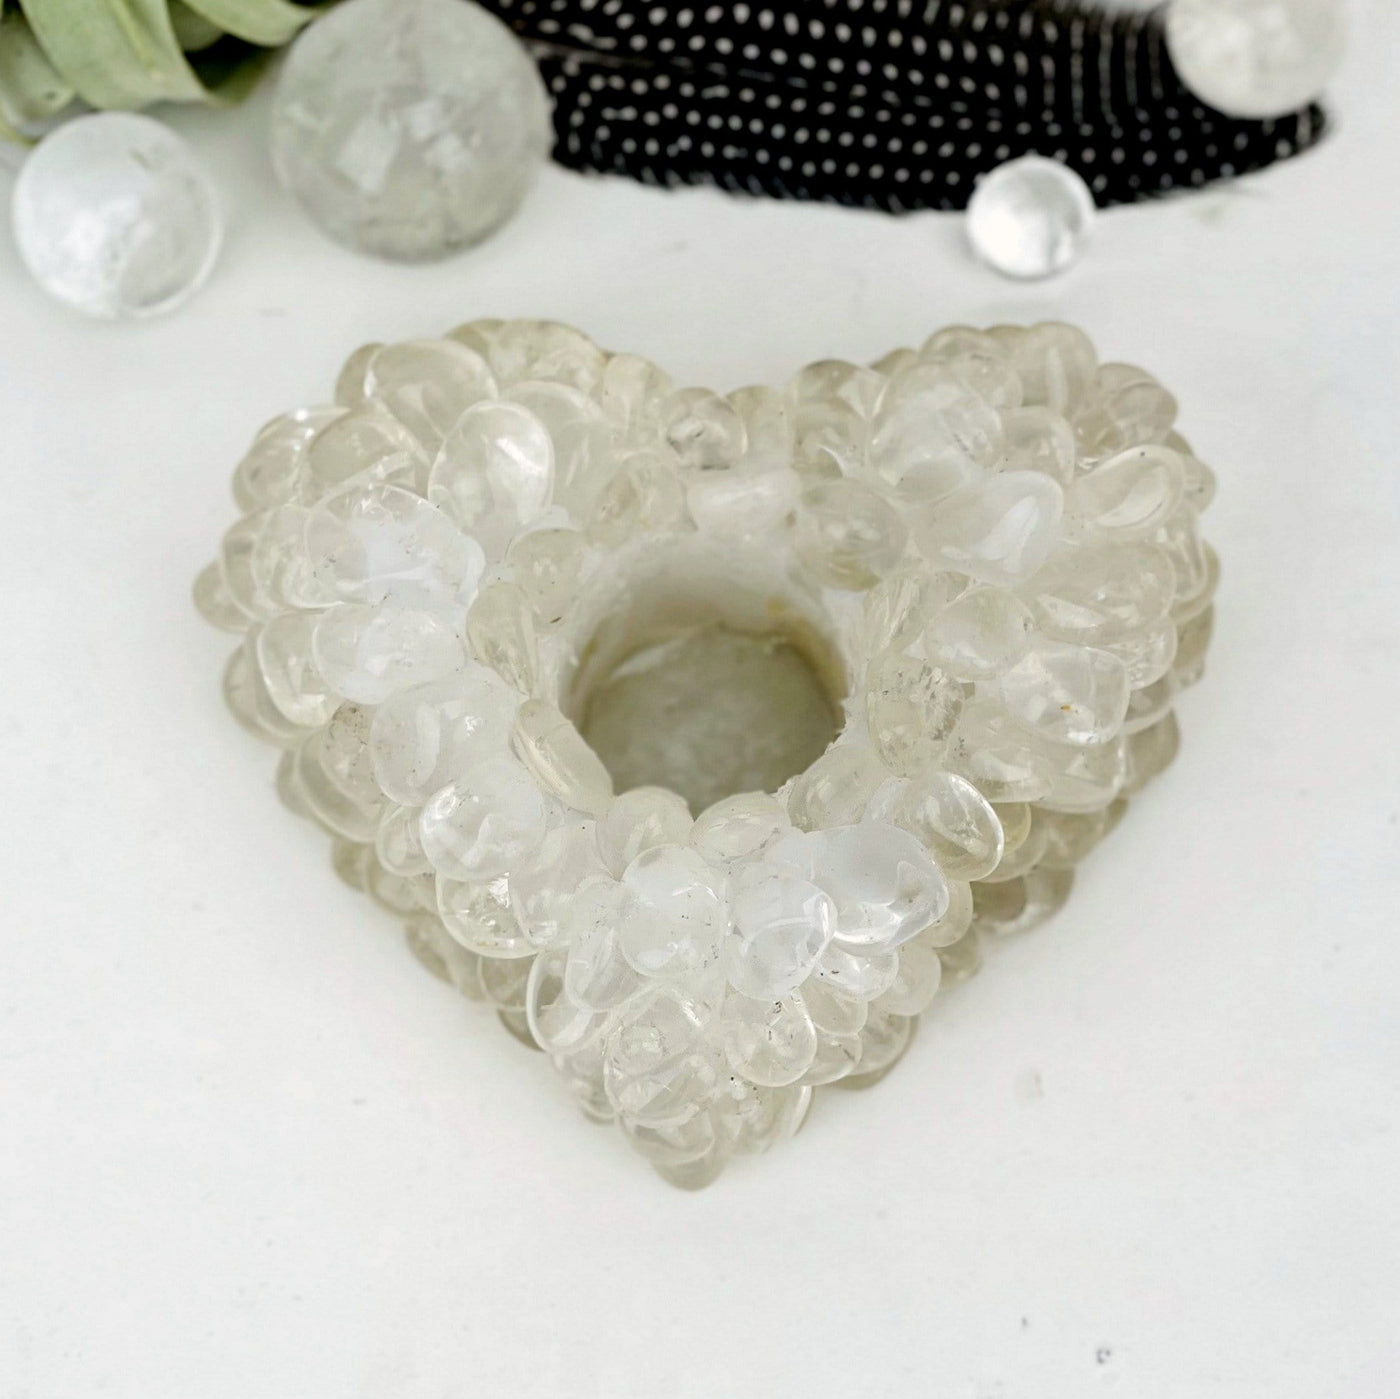 Heart shaped candle holder that is made with crystal quartz tumbled stones that are glued together.